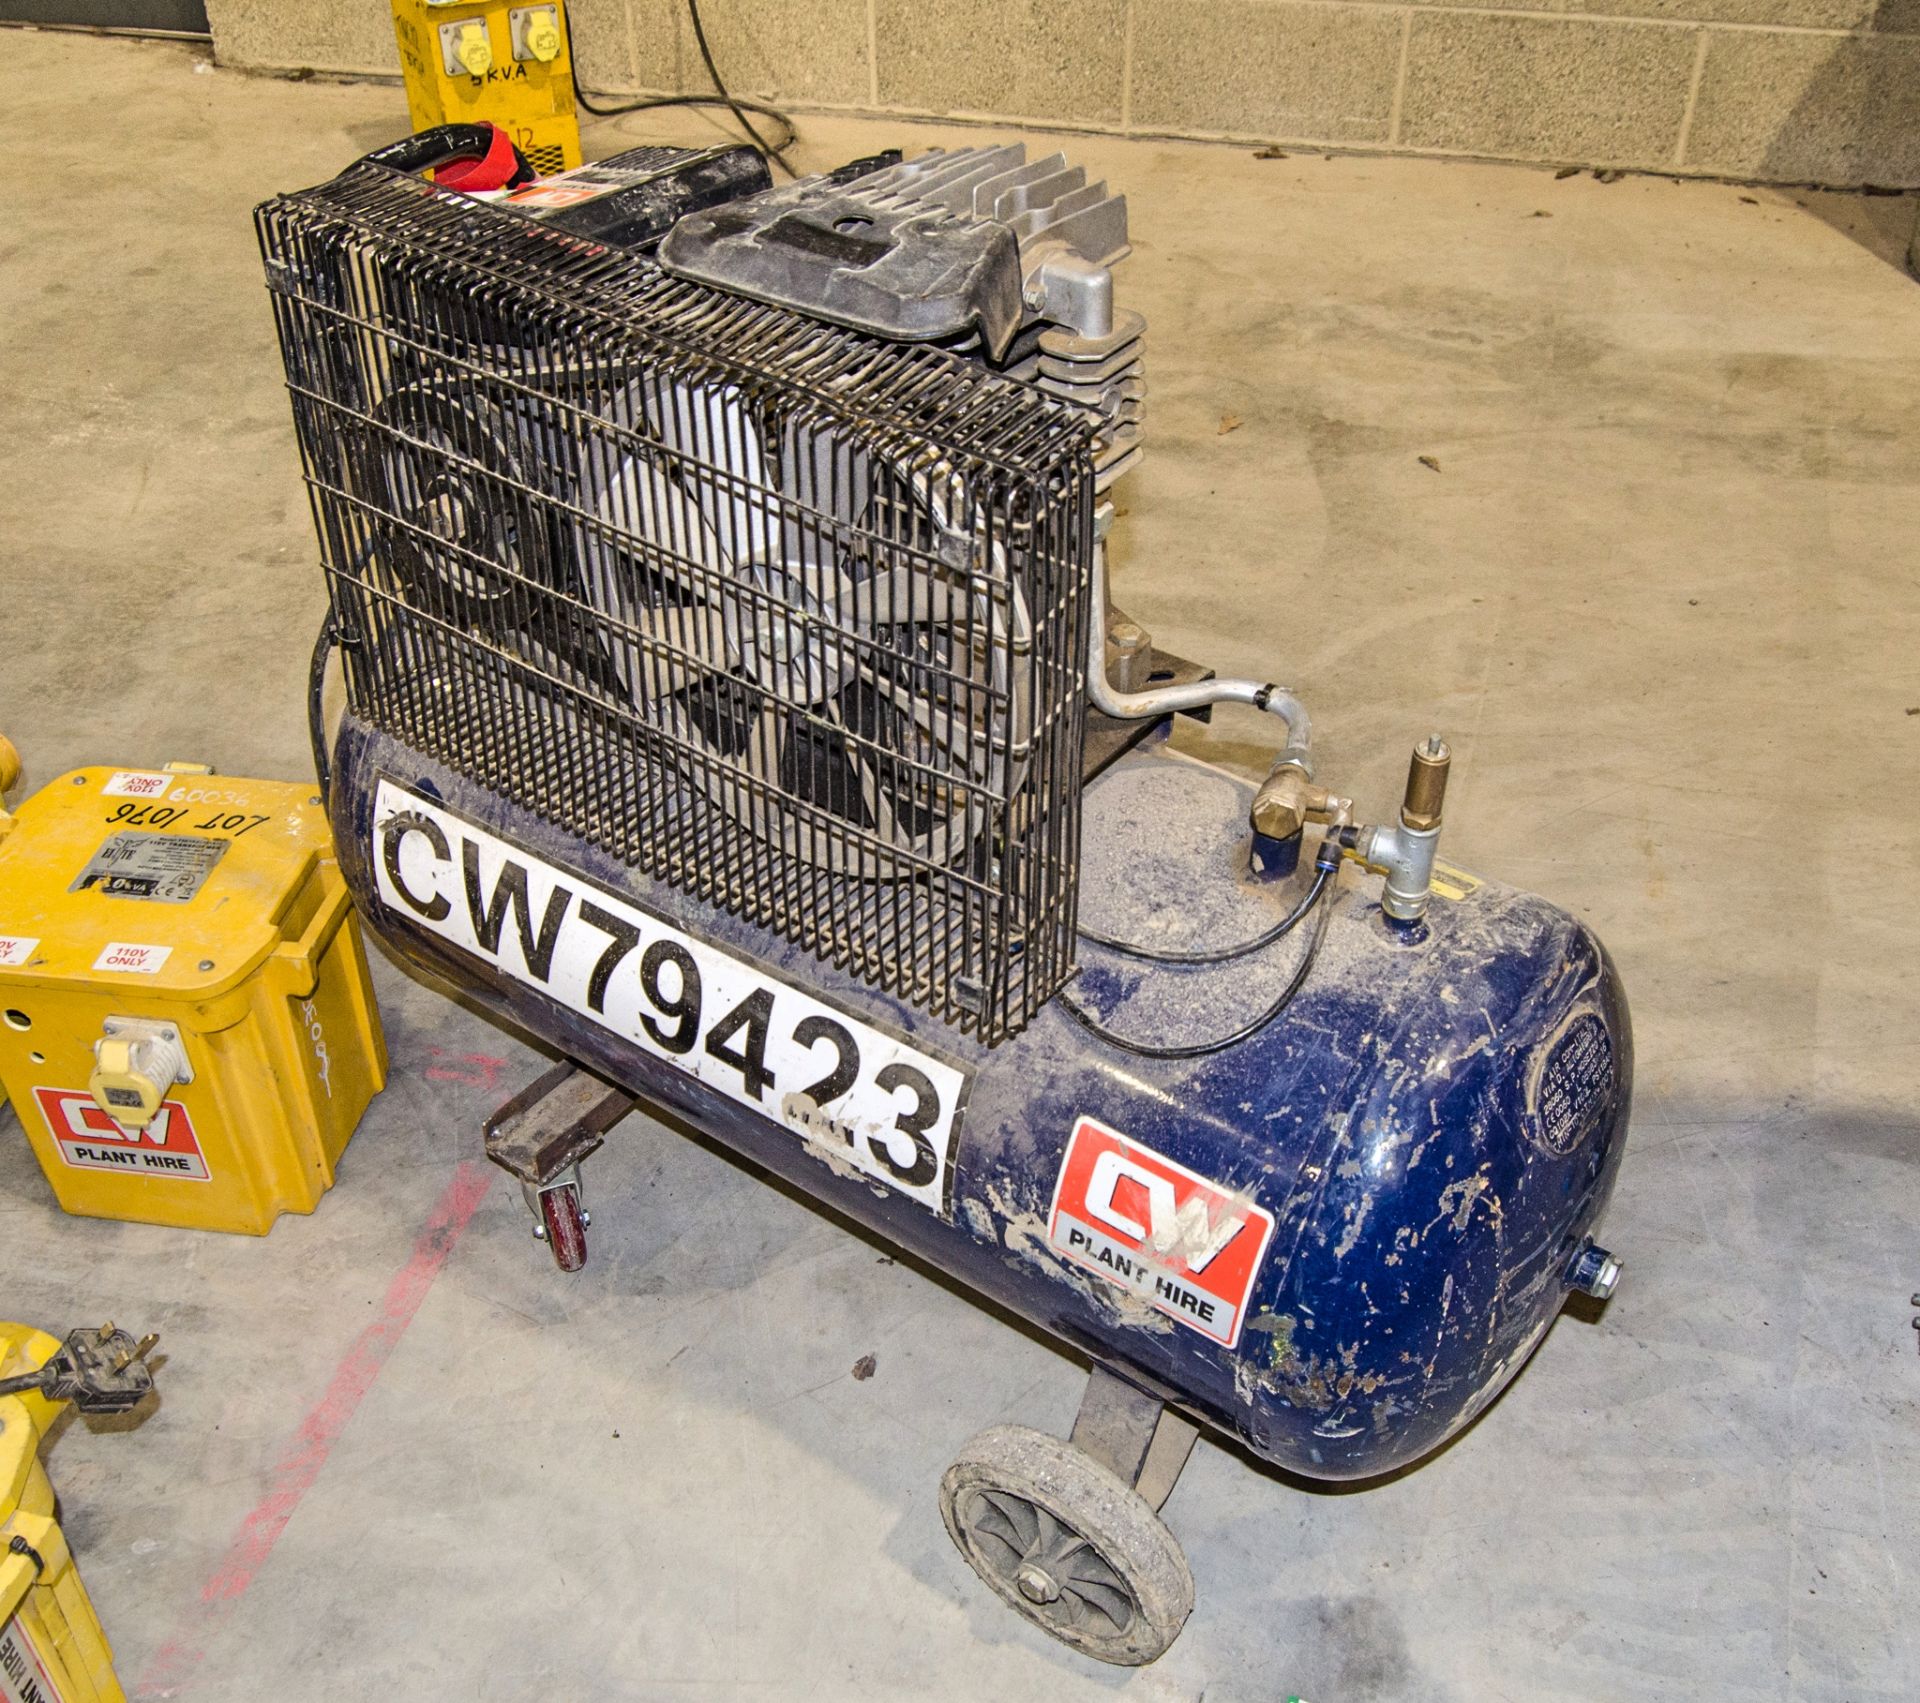 Workhorse 240v receiver mounted air compressor ** Electric motor damaged ** CW79423 - Image 2 of 2